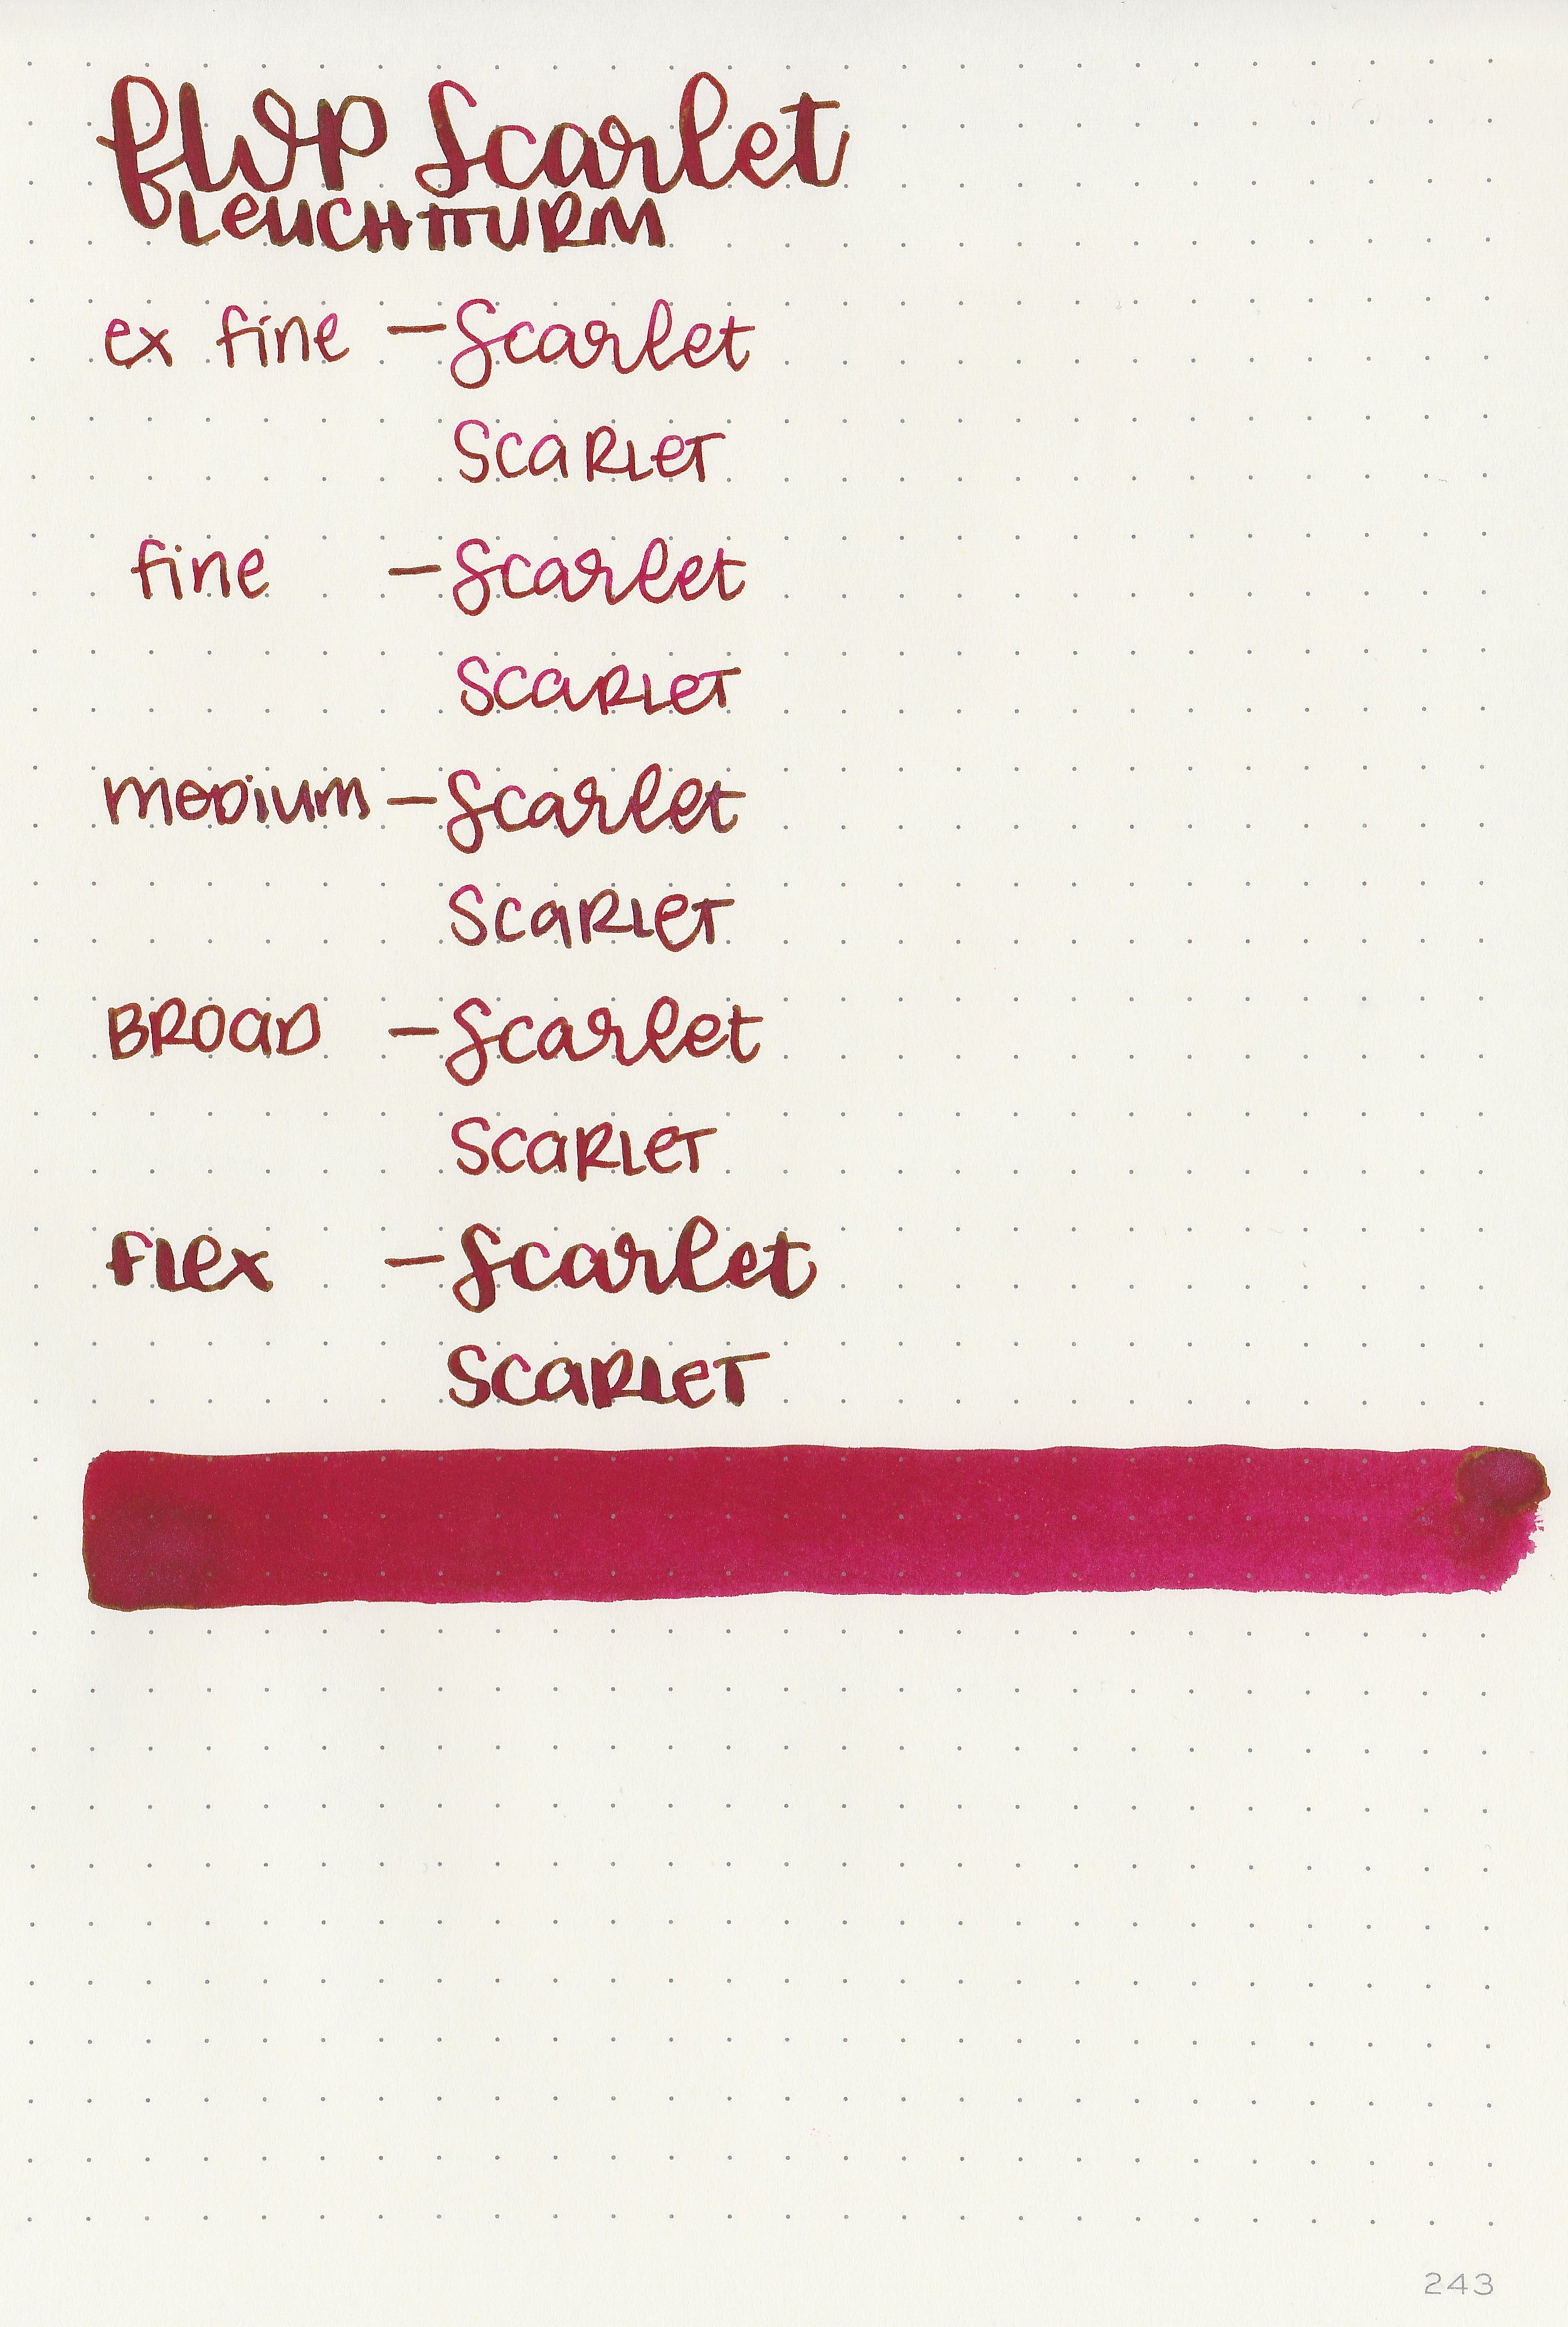 Ink Review #2396: Ferris Wheel Press Song of Scarlet — Mountain of Ink